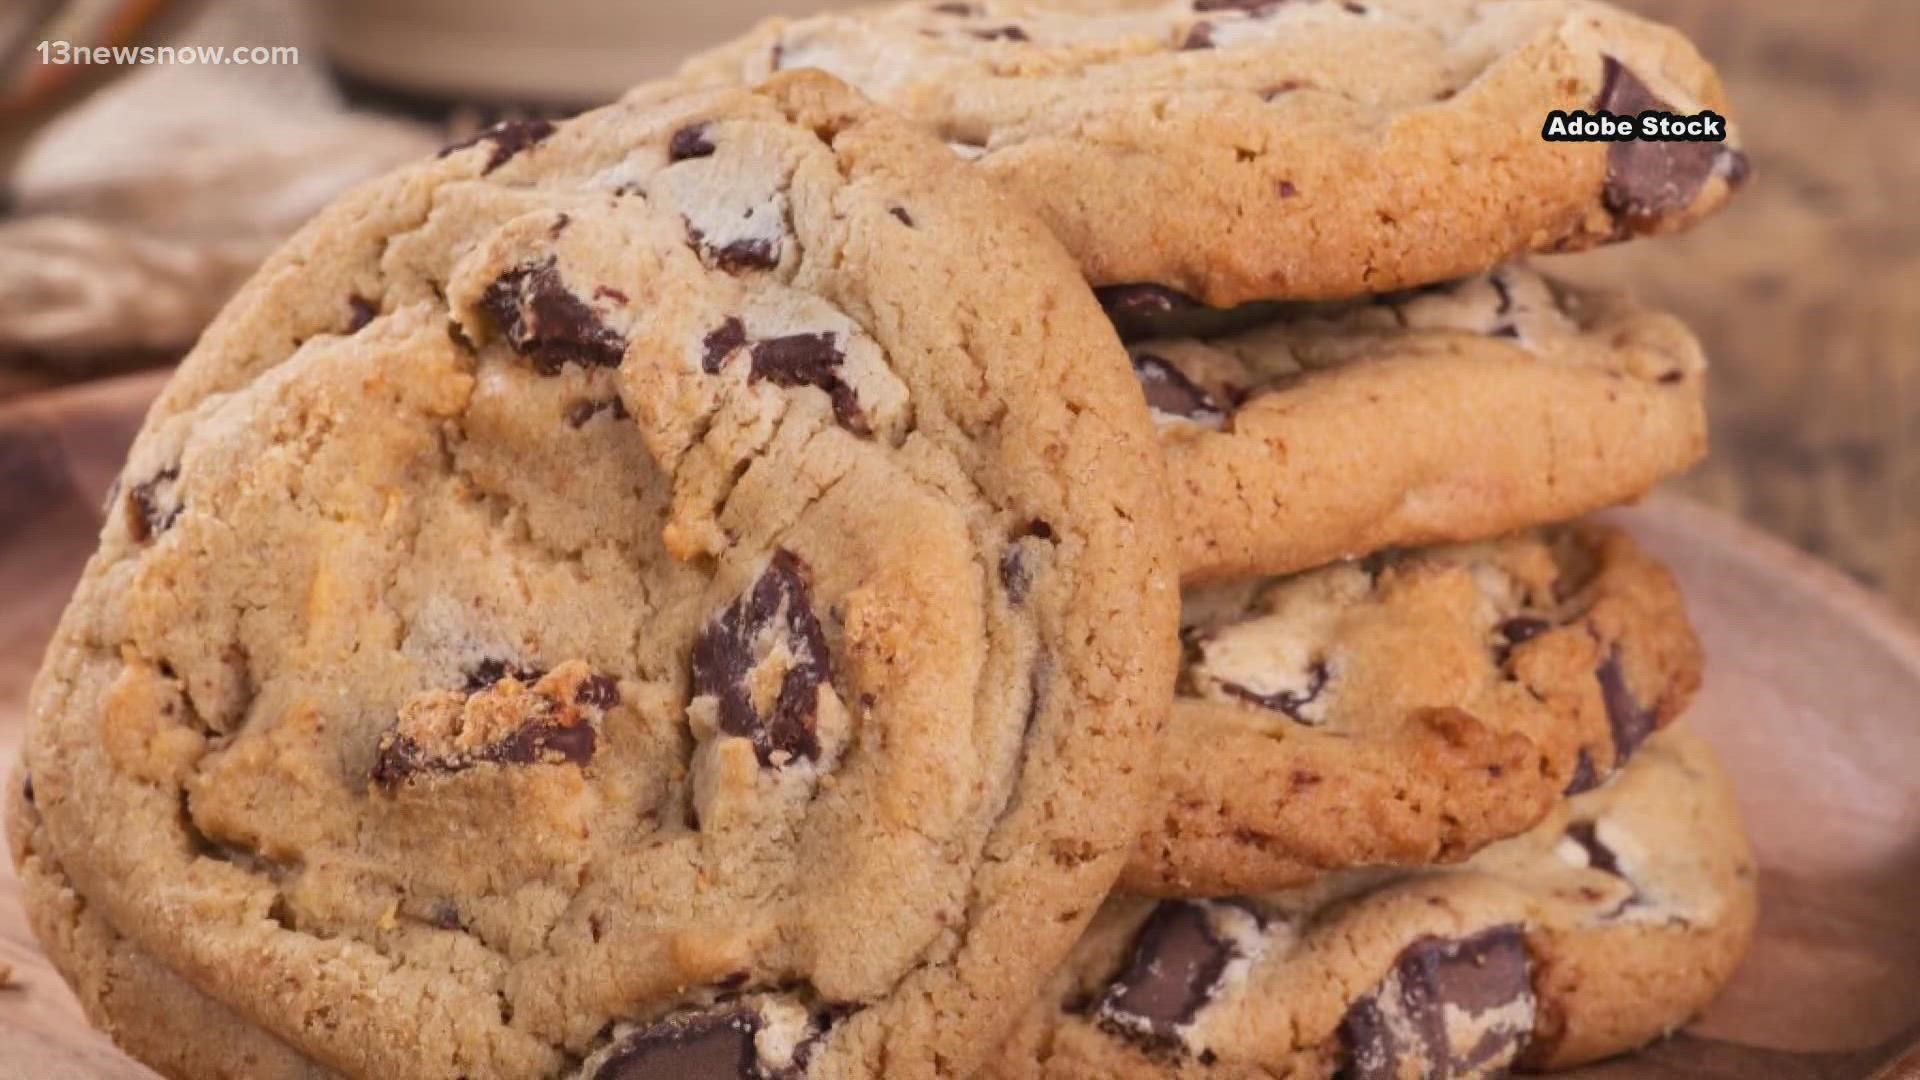 Insomnia Cookies will be giving away free chocolate chip cookies with every purchase.